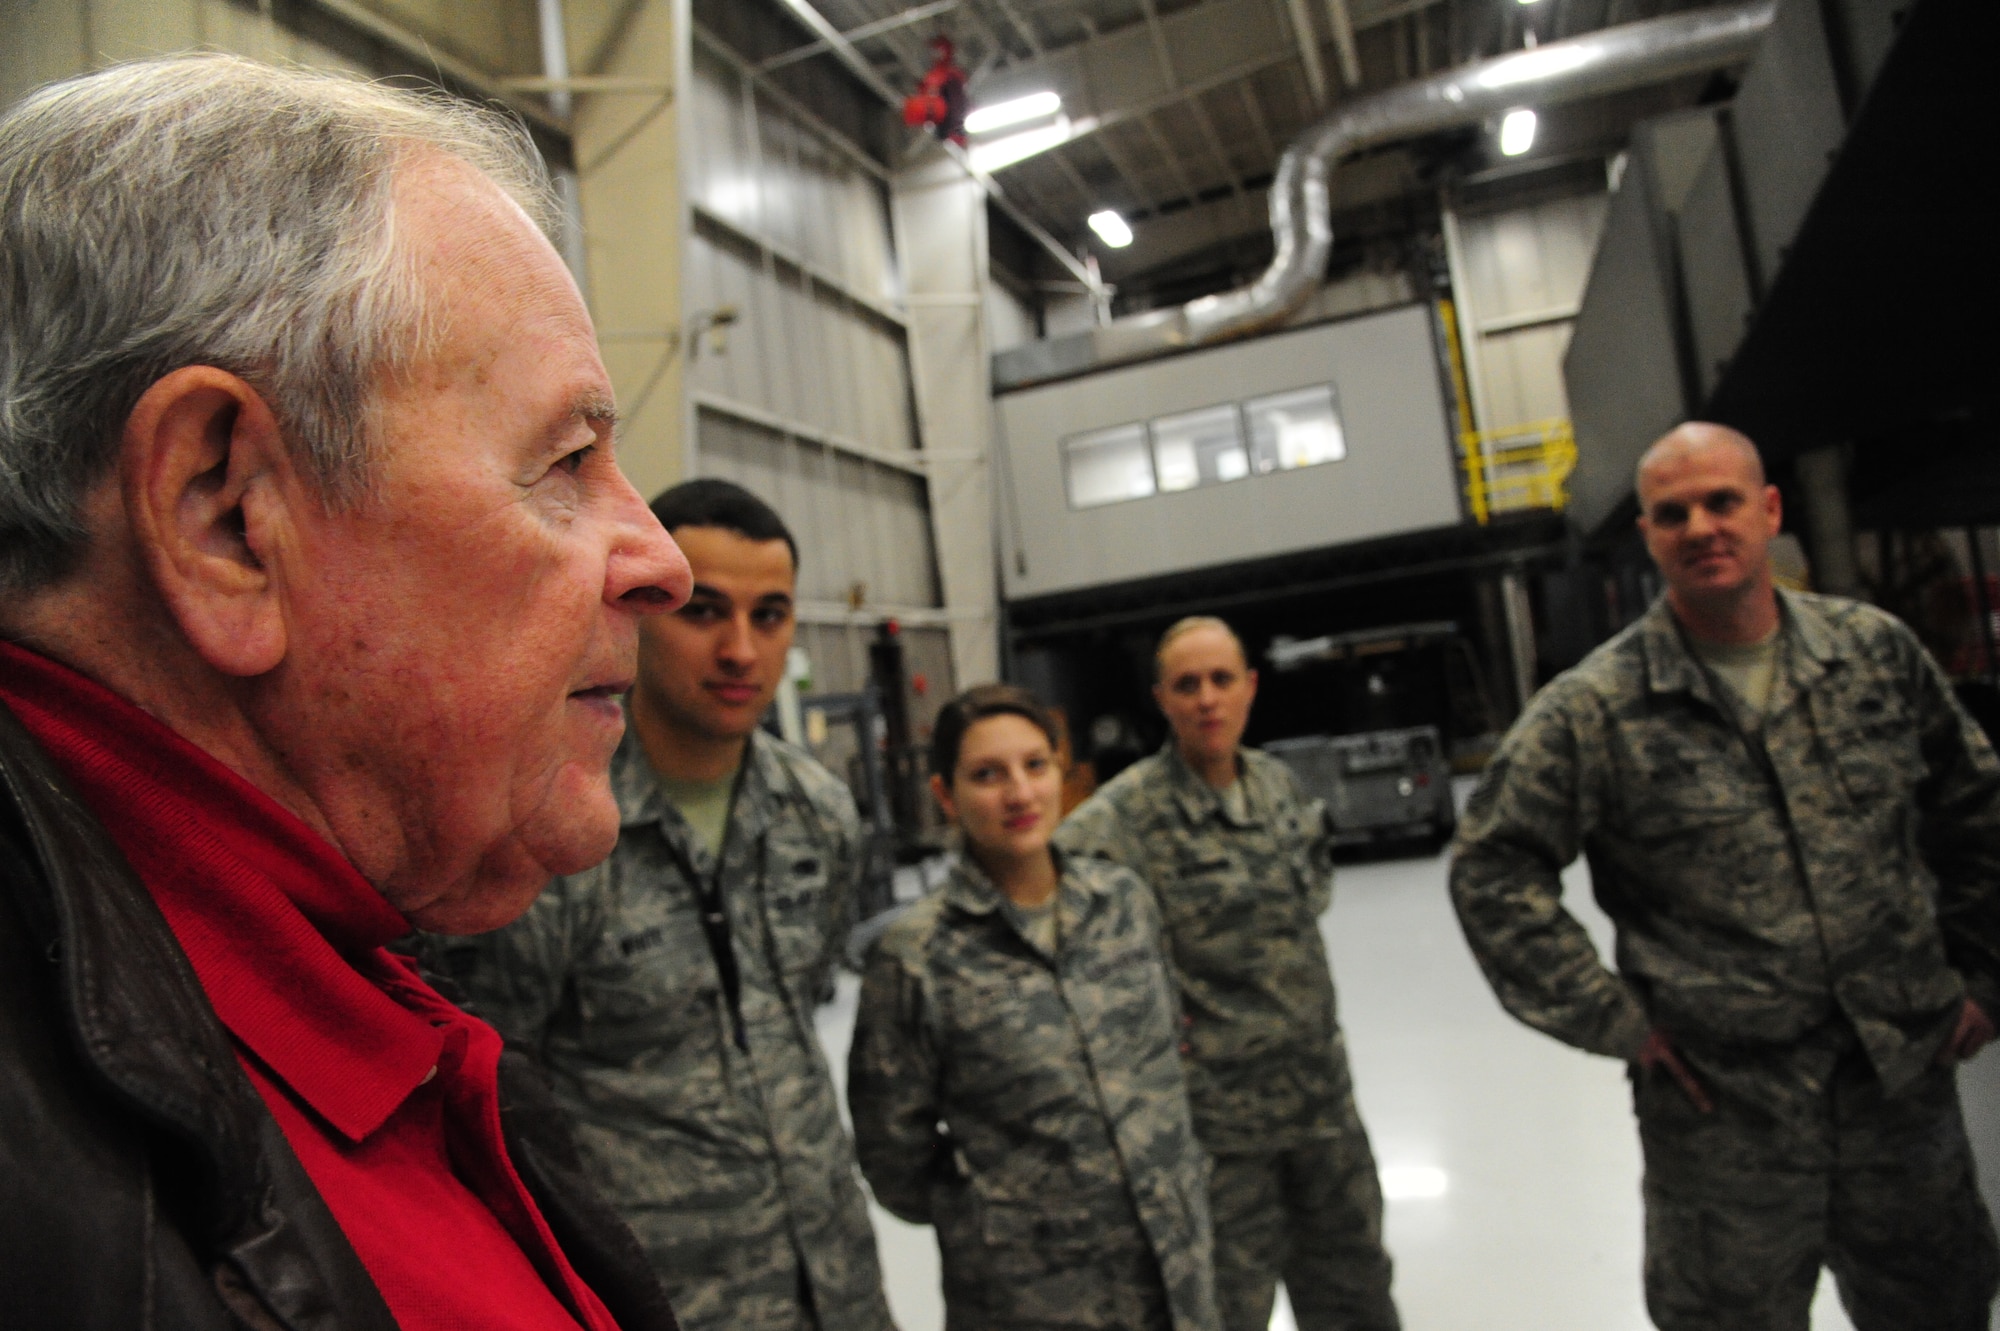 Charlie Brown, the 13th Bomb Squadron Association president, talks to Airmen from the 13th Aircraft Maintenance Unit at Whiteman Air Force Base, Mo., Dec. 17, 2015. The Airmen were educated on how maintenance operations were performed in the past by the veterans as well as about the association’s mission. (U.S. Air Force photo by Senior Airman Keenan Berry)